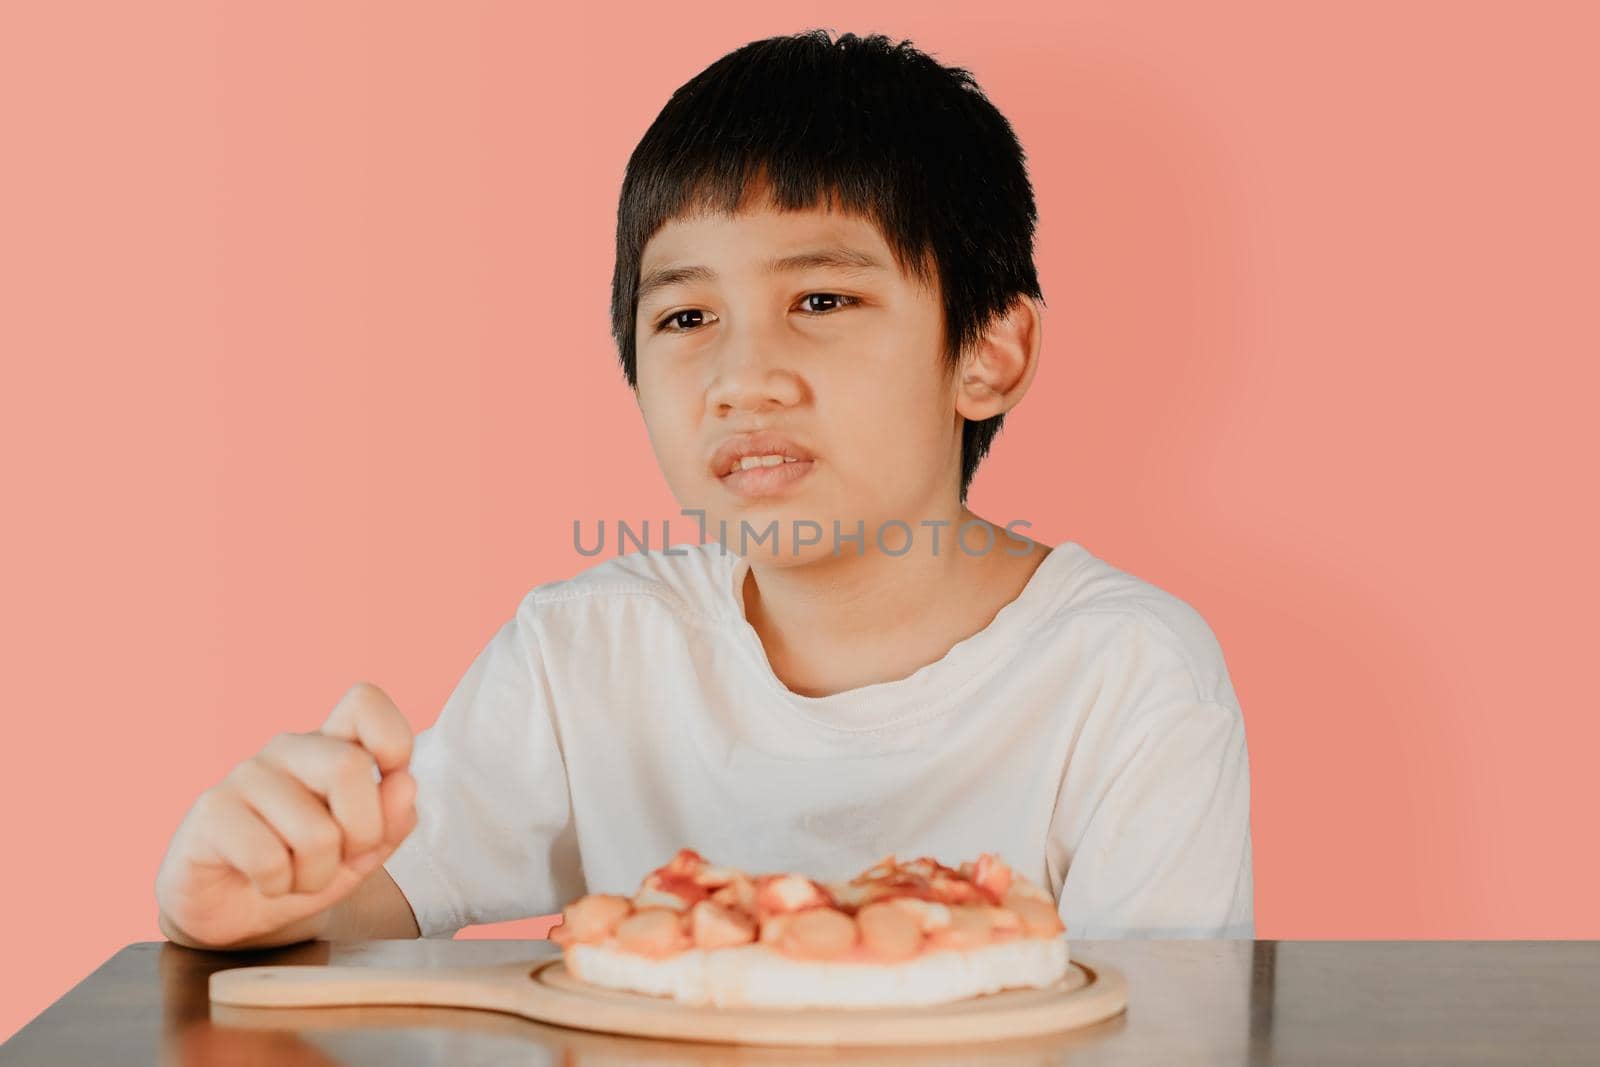 Asian cute boy sitting at the dining table with pizza on the table in front. by wattanaphob